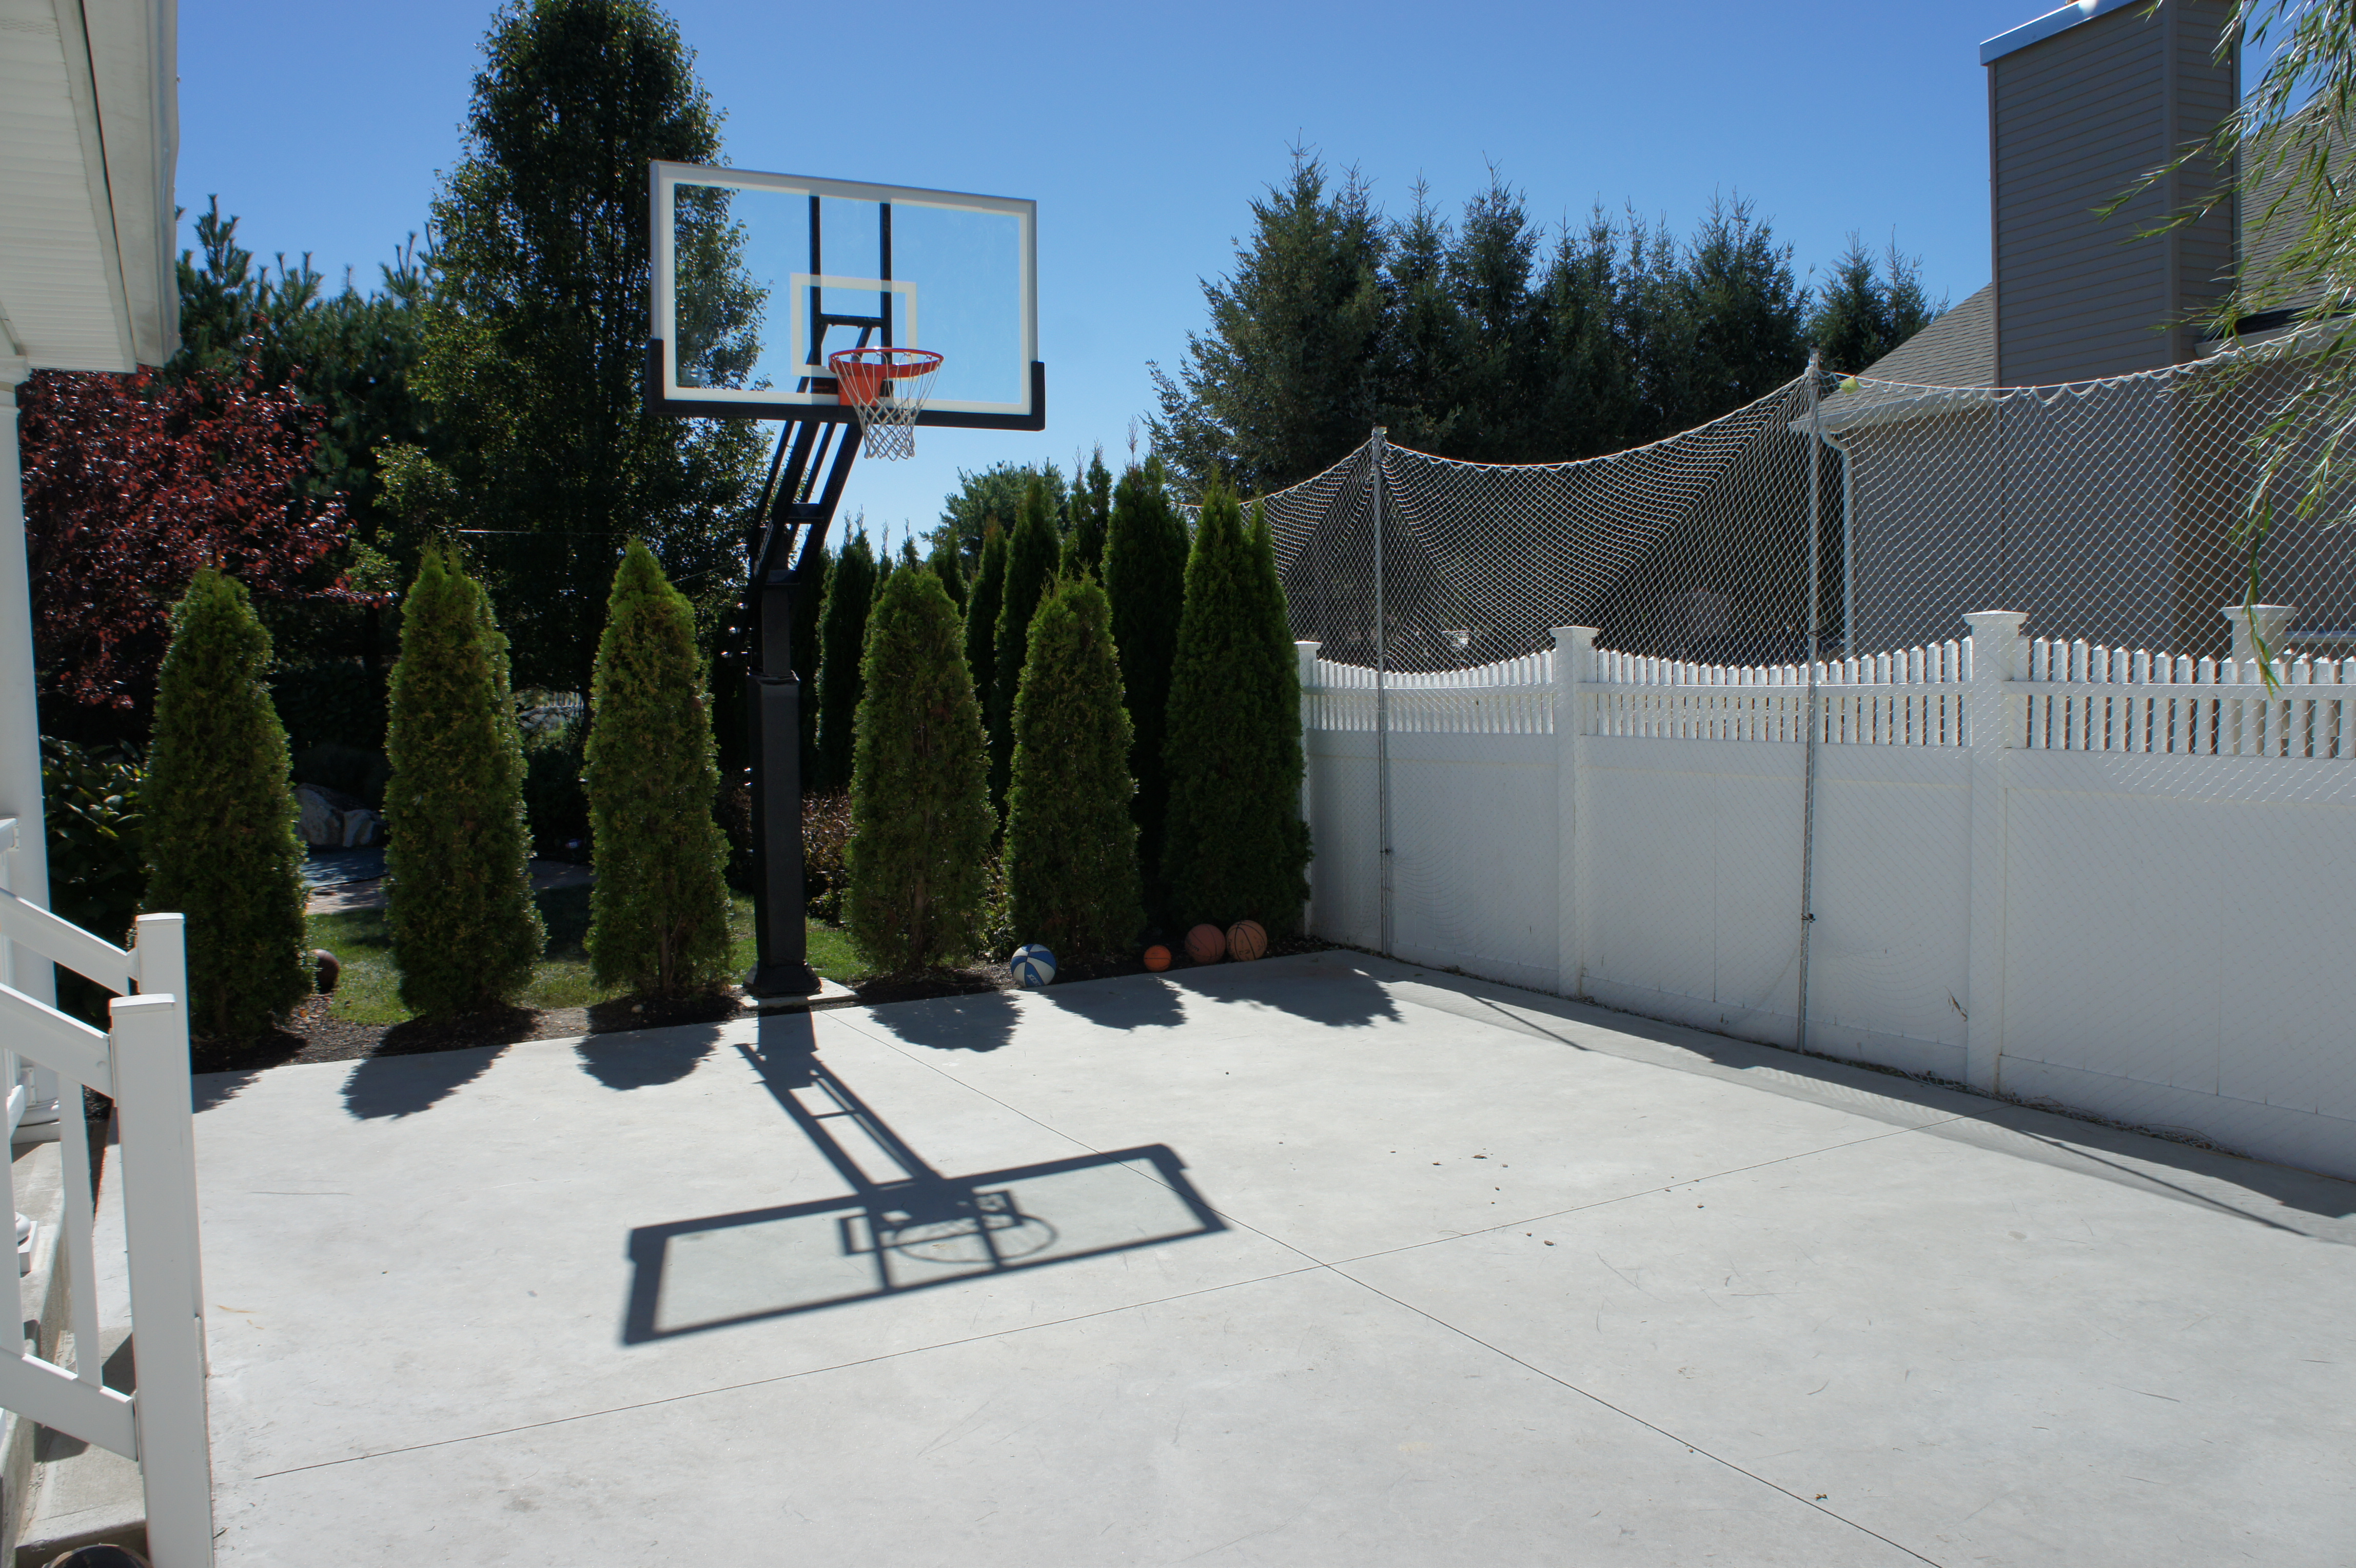 In The Middle You Can See Pro Dunk Diamond Basketball System intended for size 4592 X 3056